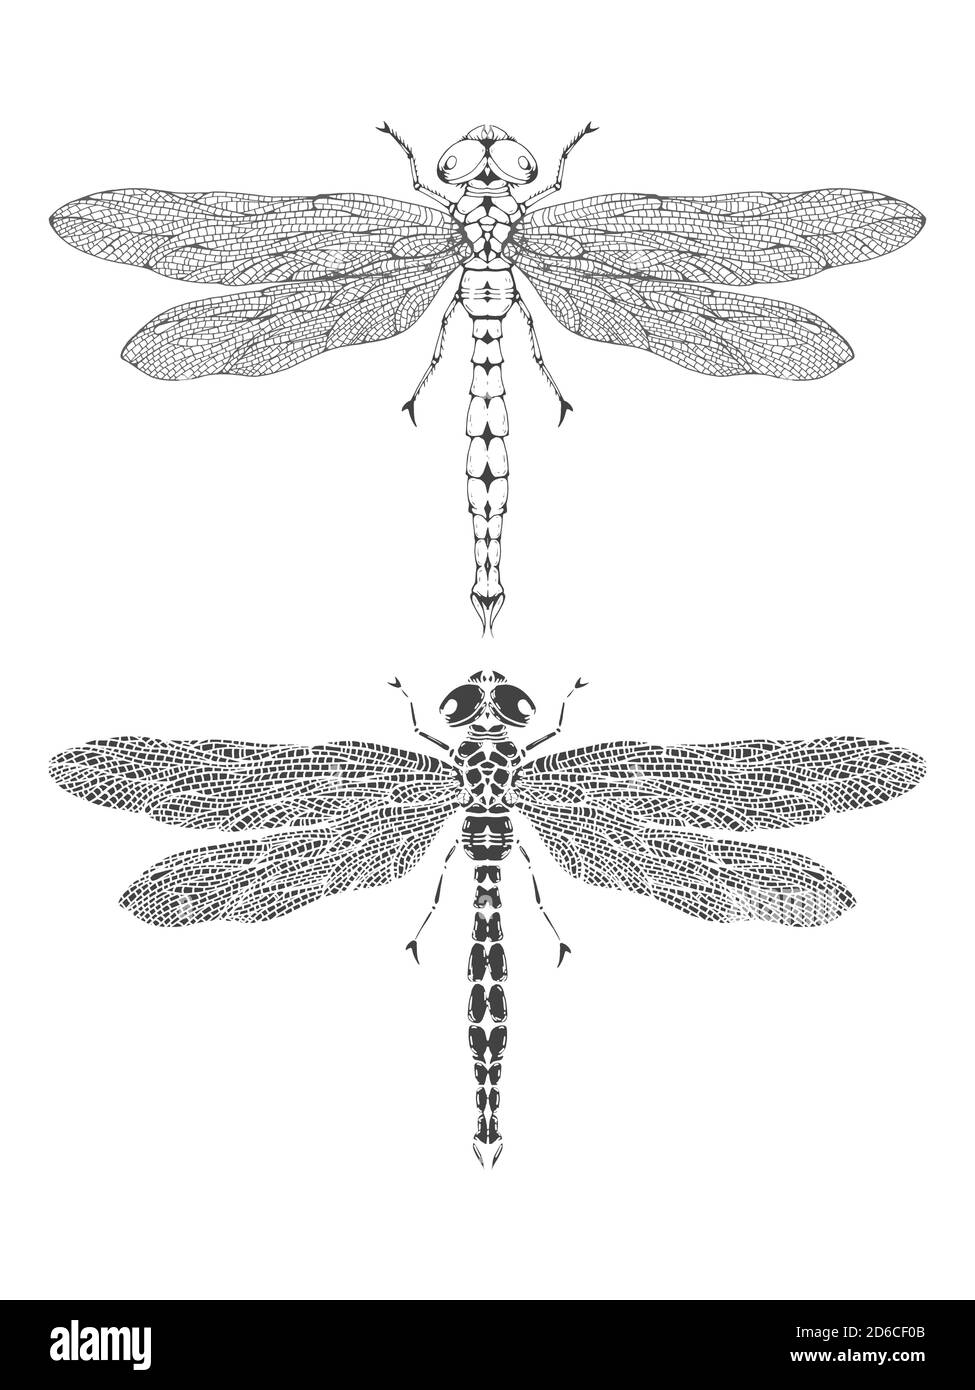 Vector illustration with hand drawn dragonfly. Two variants of insect: outline and silhouette. In realistic style. Isolated on withe background. Stock Vector